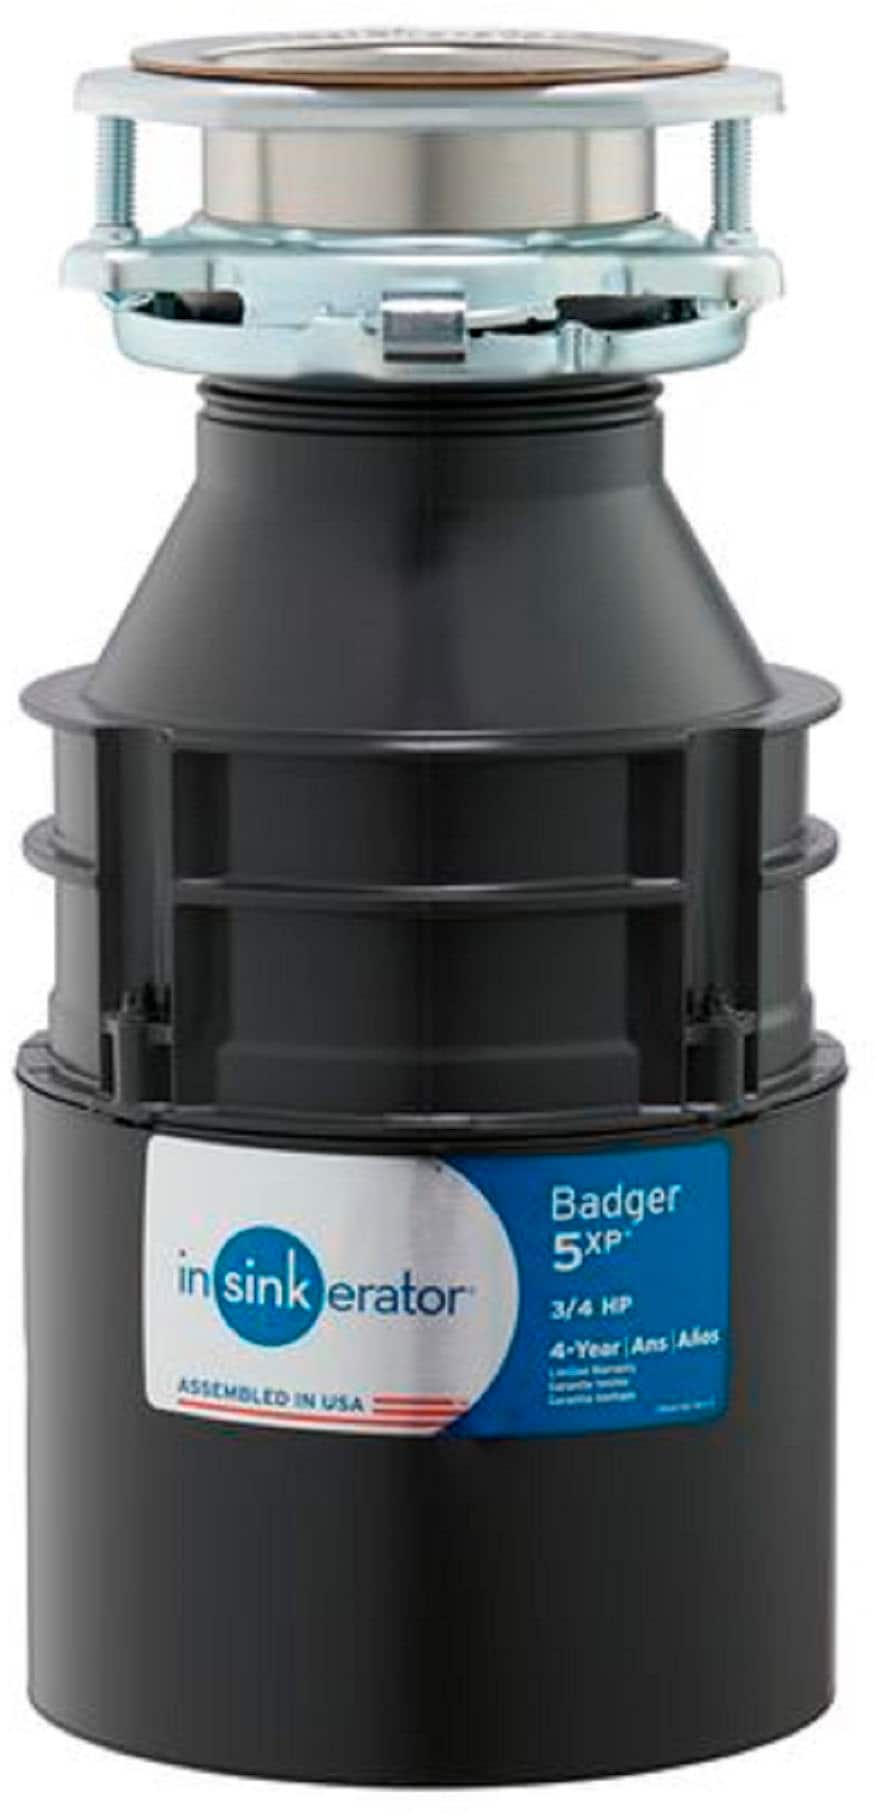 InSinkerator - Badger 5XP Lift and Latch Power Series 3/4 HP Continuous Feed Garbage Disposal with Power Cord - Black_1